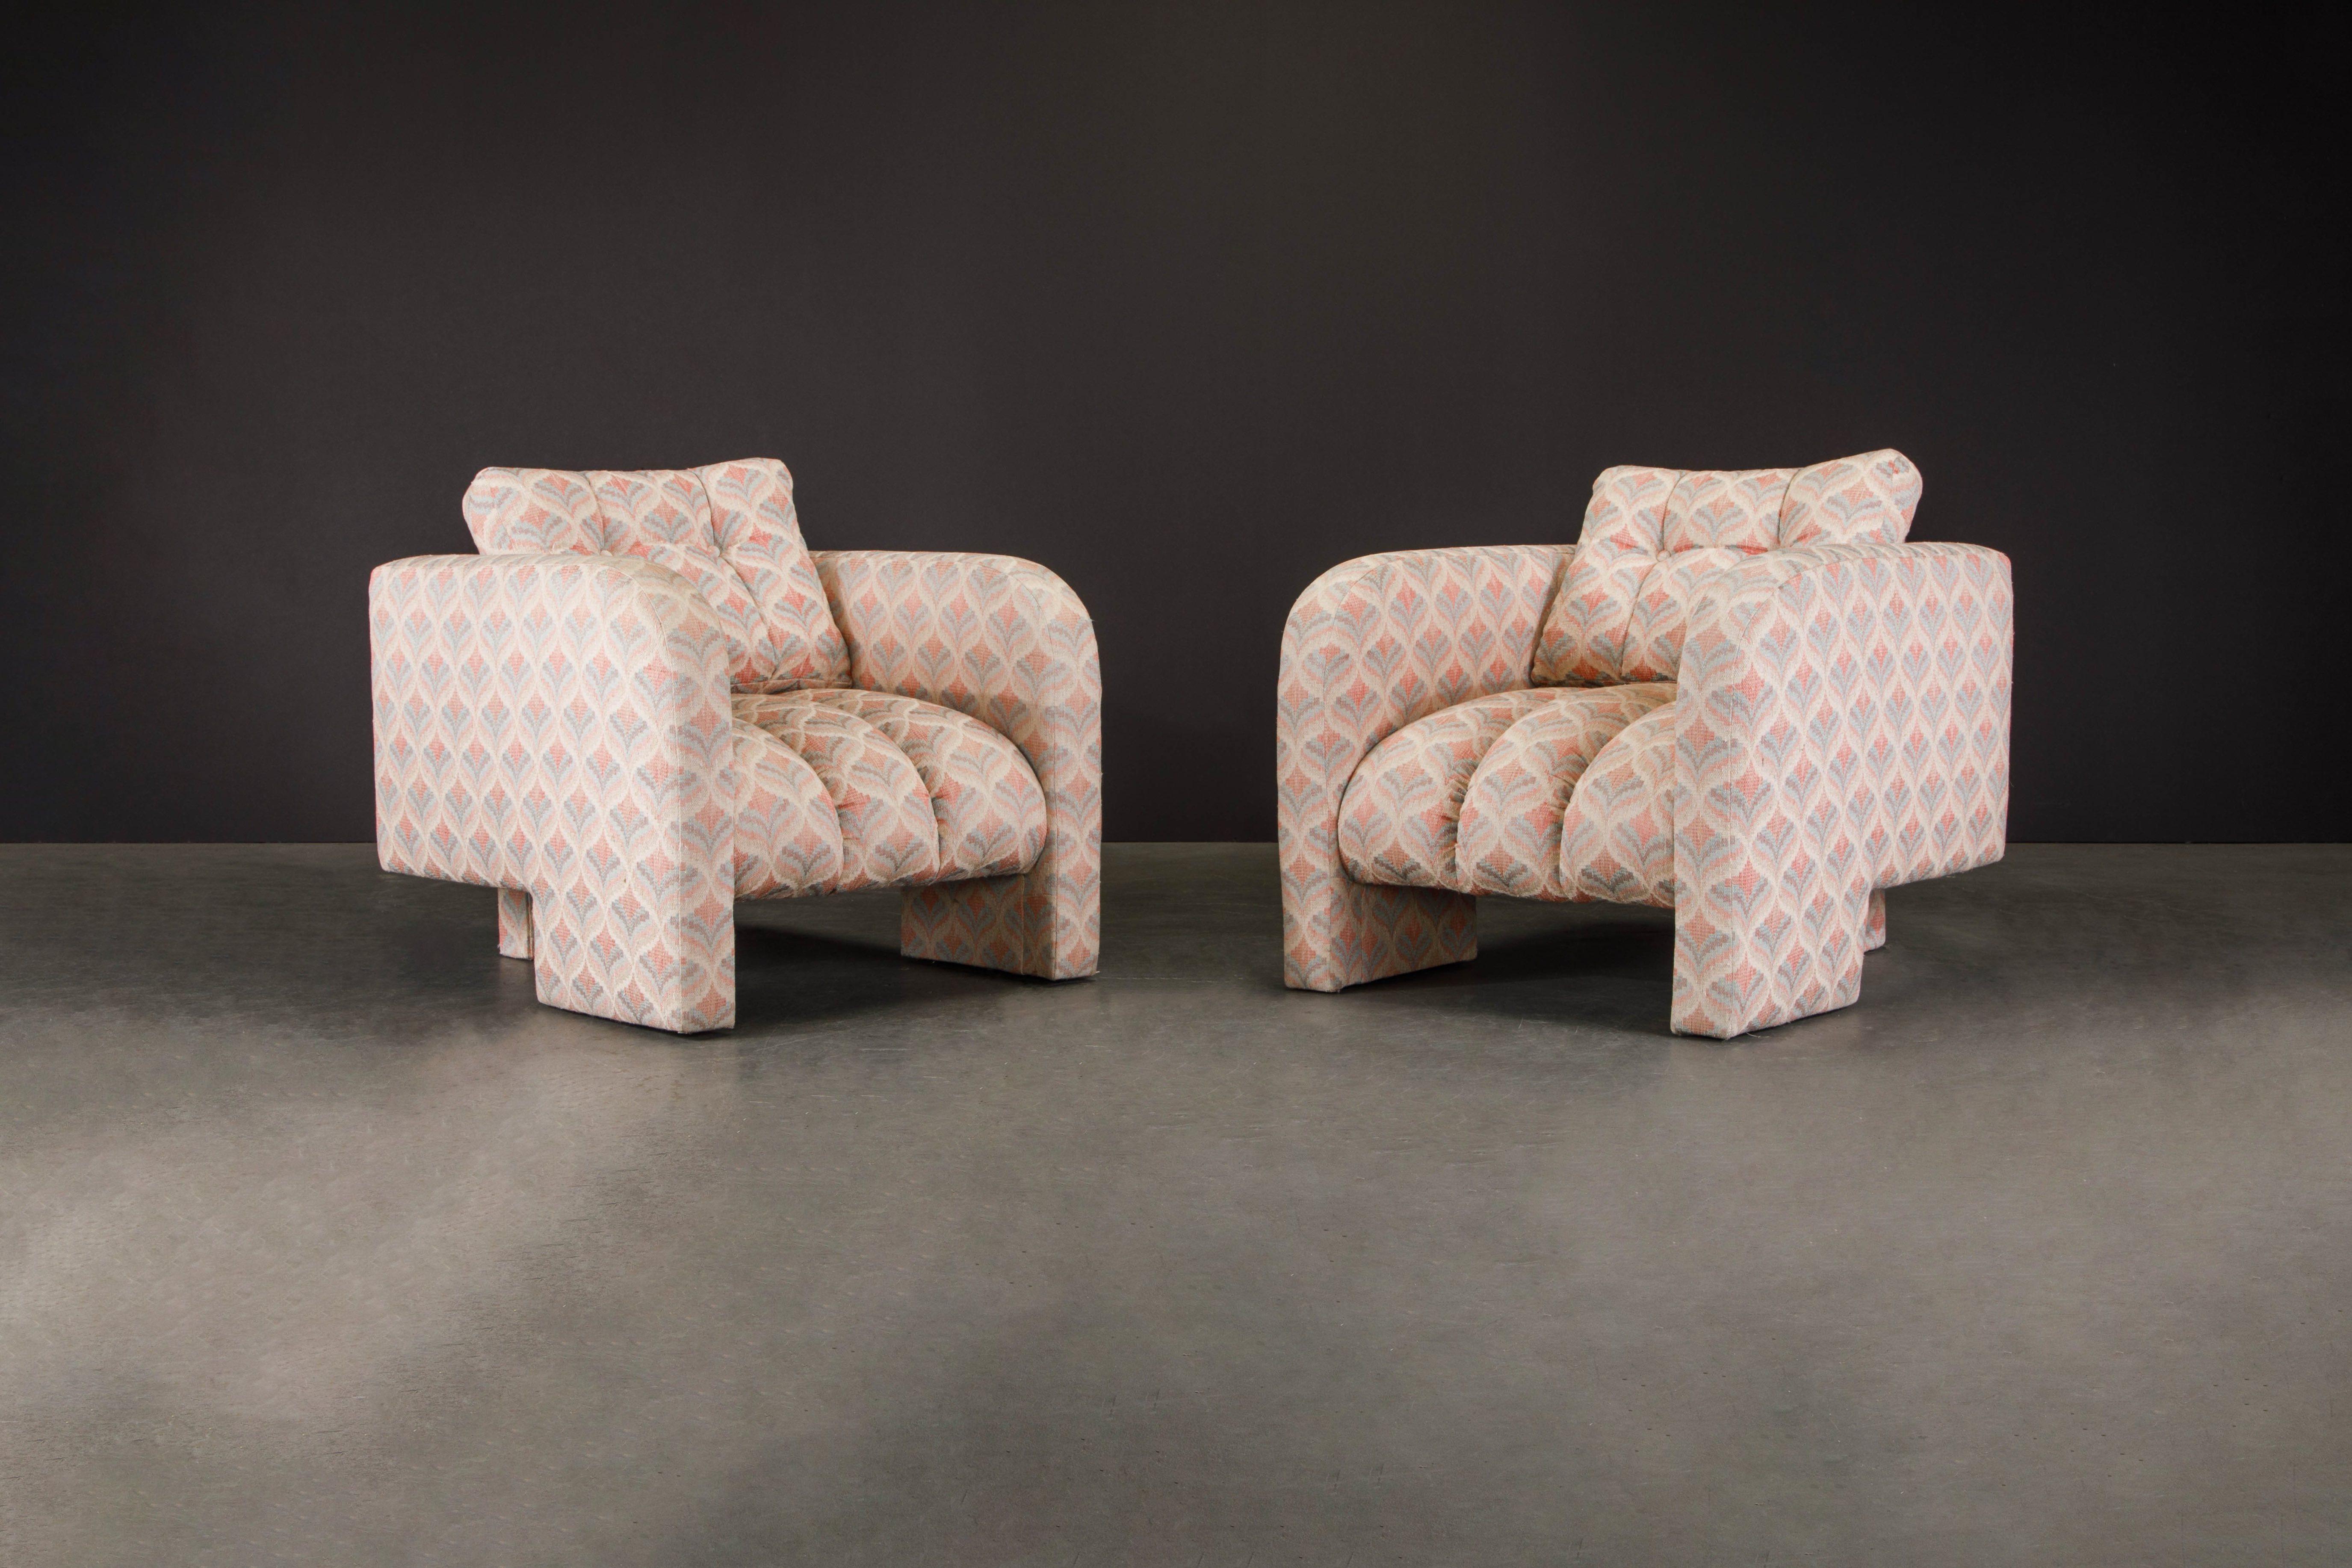 This beautiful pair of 1980s Post-Modern channel tufted lounge chairs feature three legs, one rear center leg and curved arms which morph in the front two legs, these club chairs have incredible vintage fabric with shades of pink and light blue. The